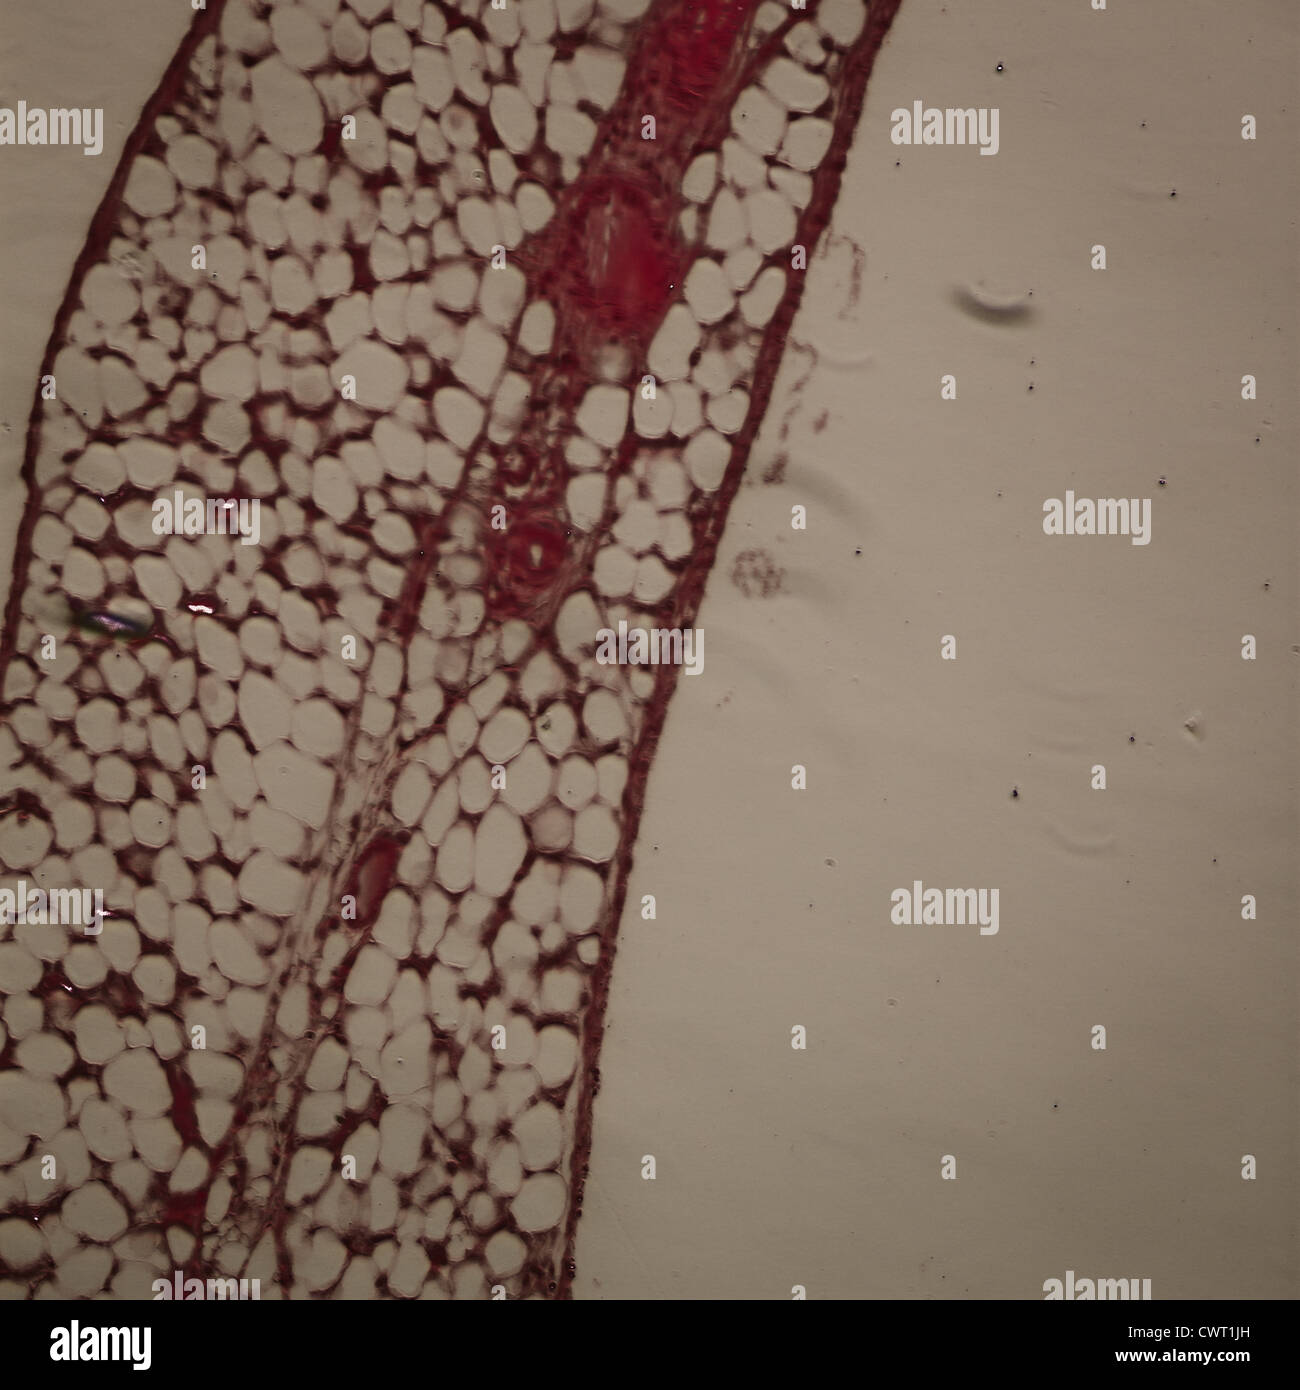 science medical anthropotomy physiology micrograph of blood vessel, artery and vein. Stock Photo